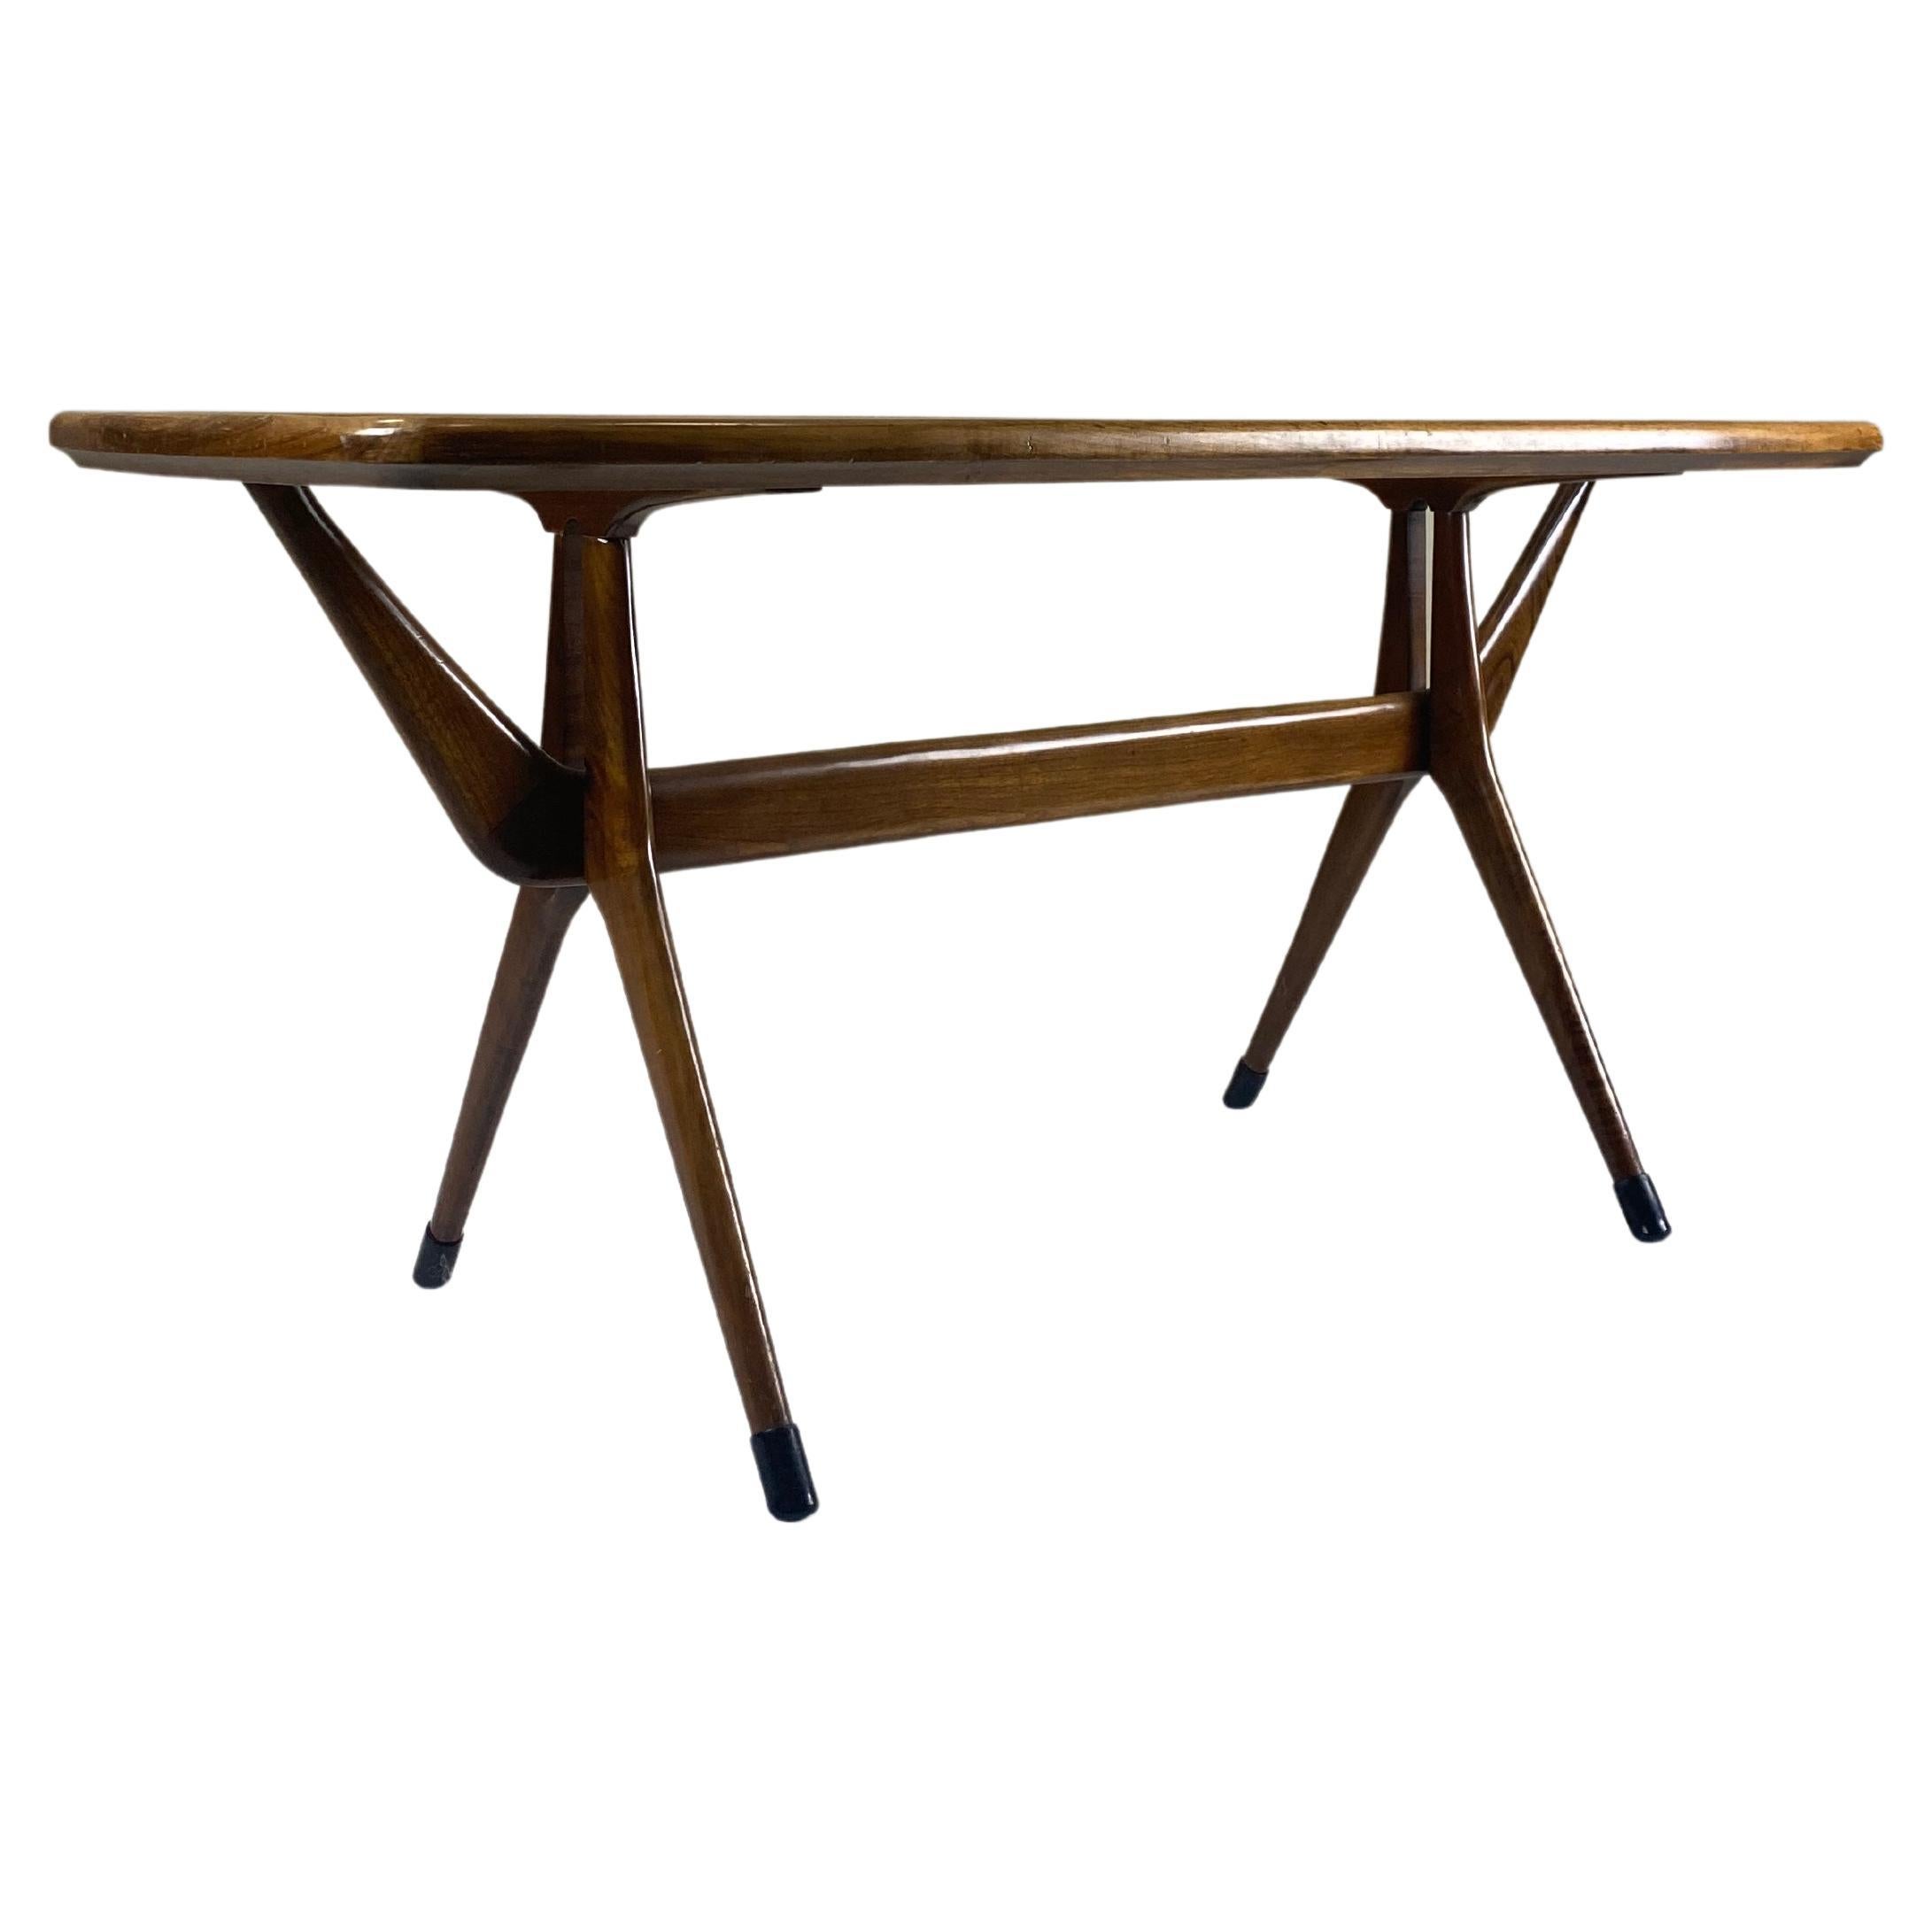 Italian Avantgarde Walnut Coffee Table, Attributed to Cesare Lacca for Cassina